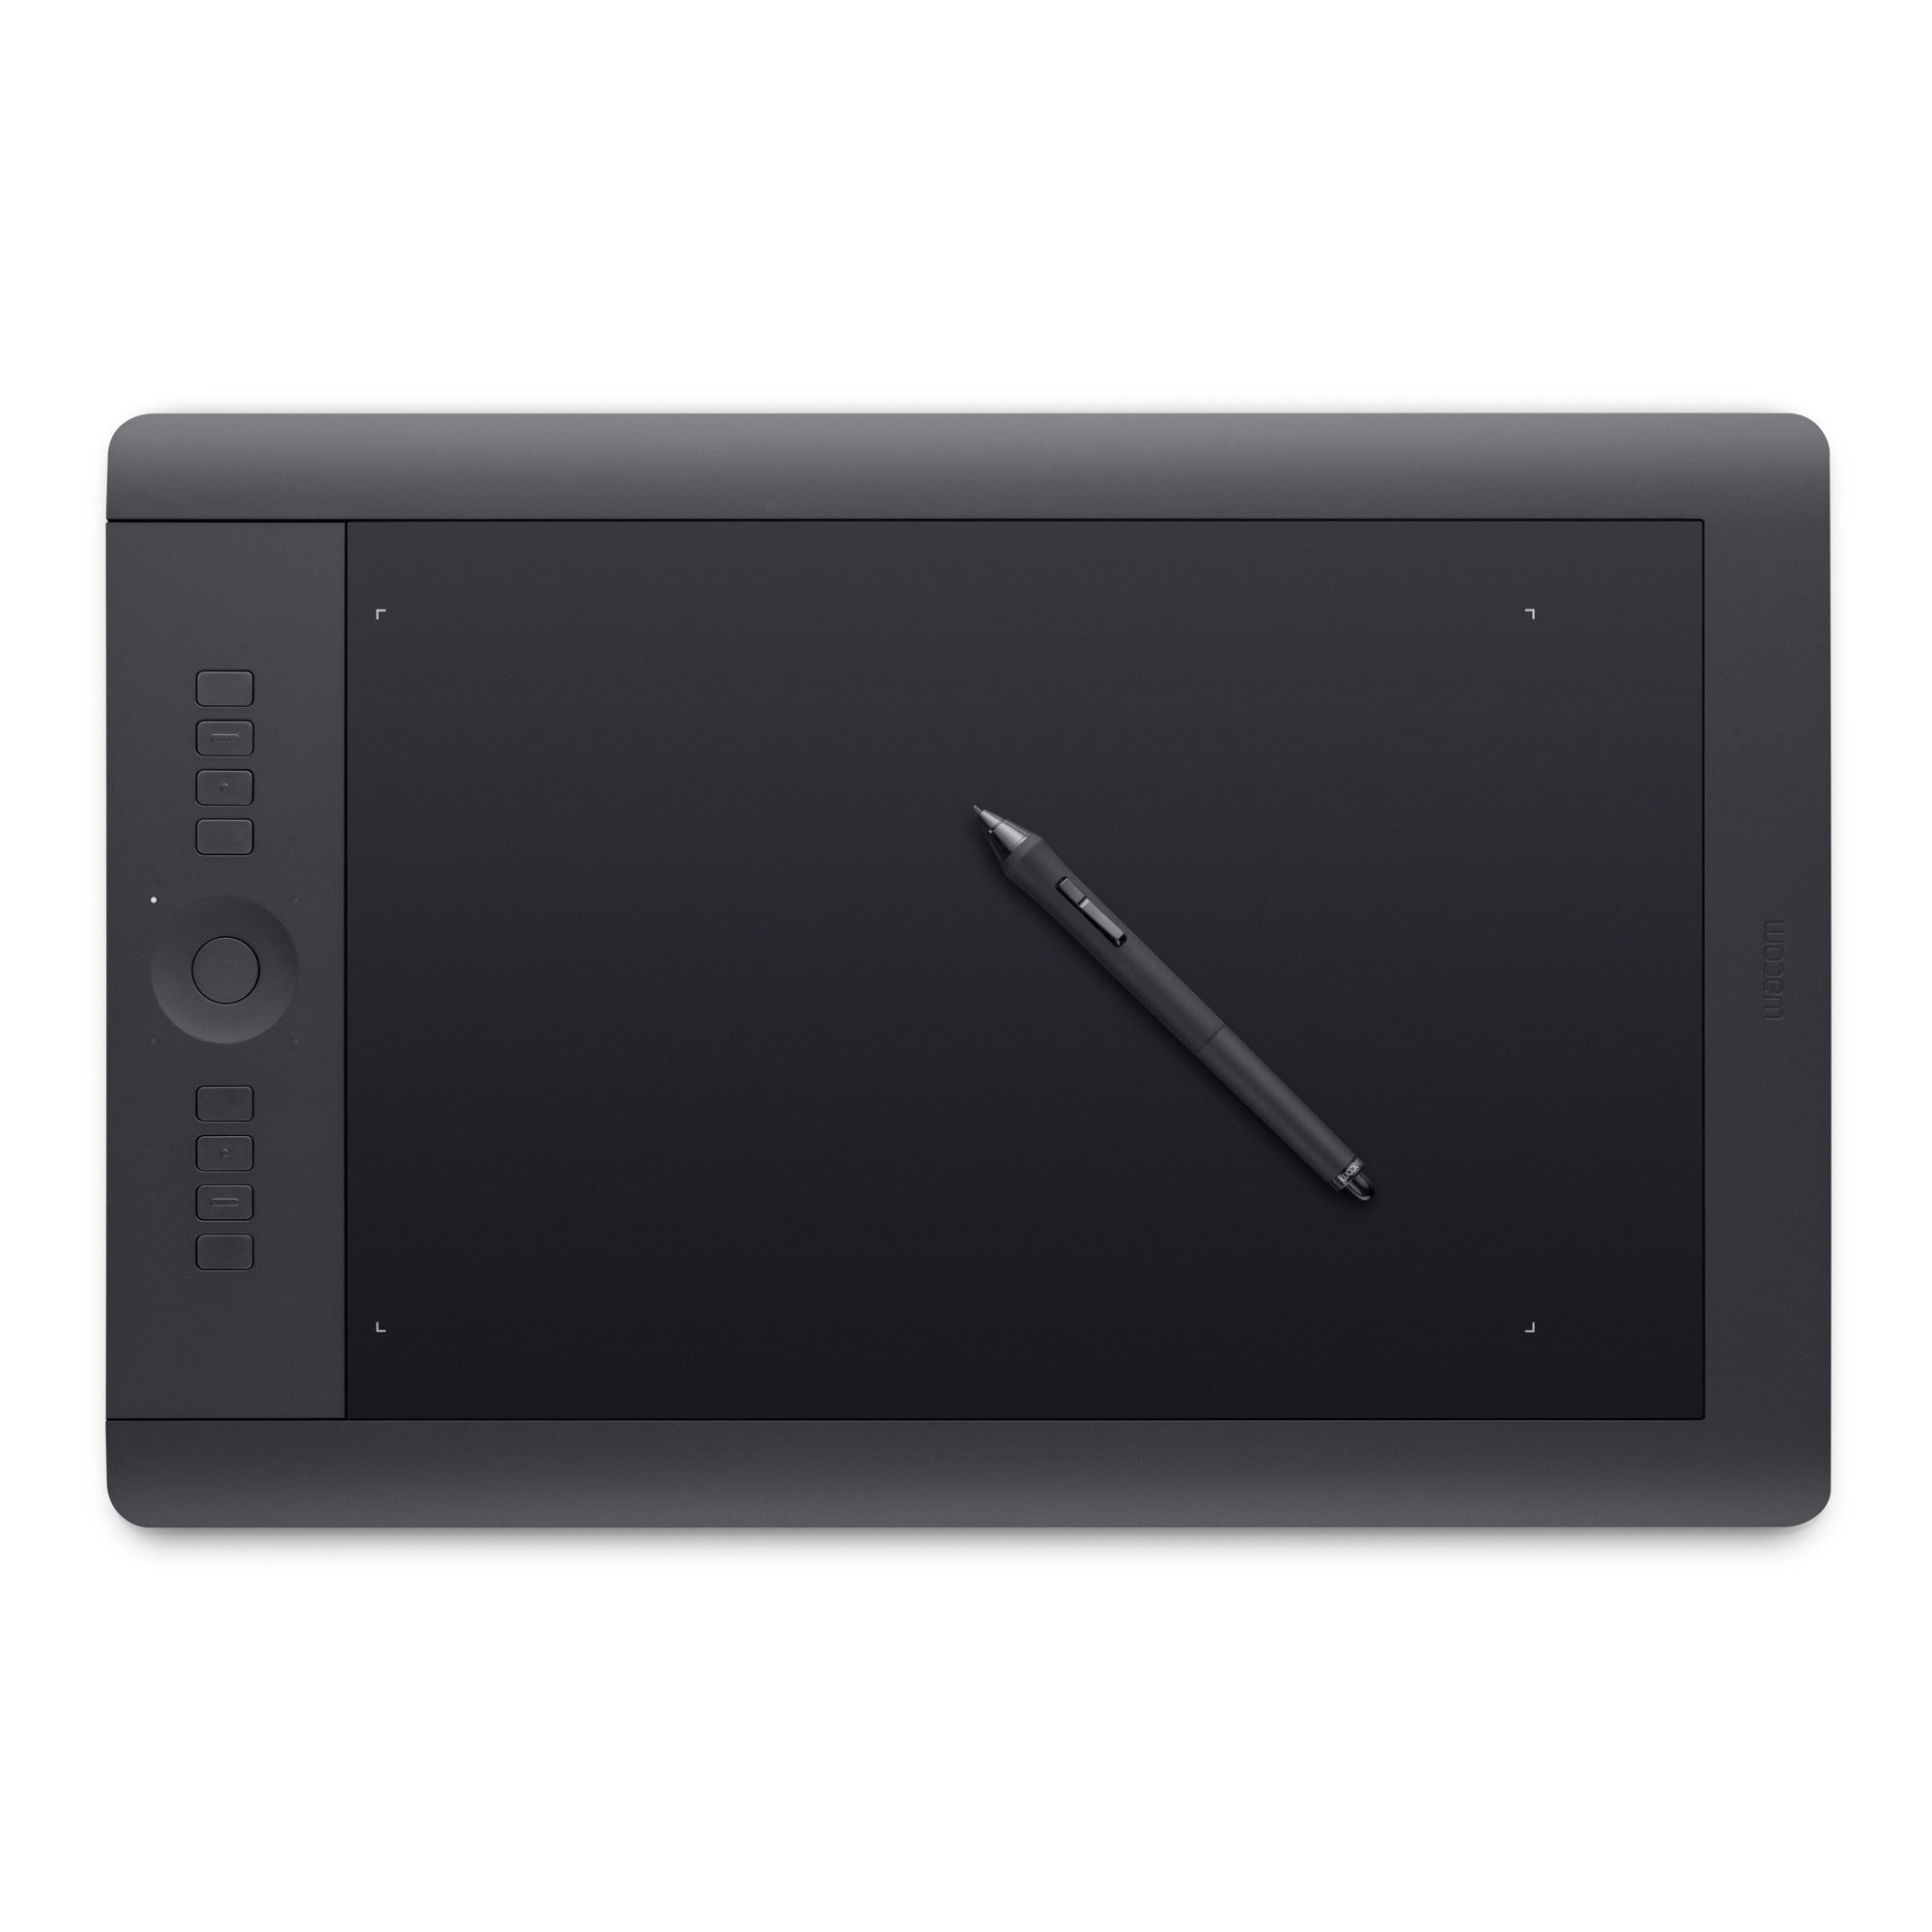 Intuos Pro Pen and Touch Drawing Tablet Simply Computing